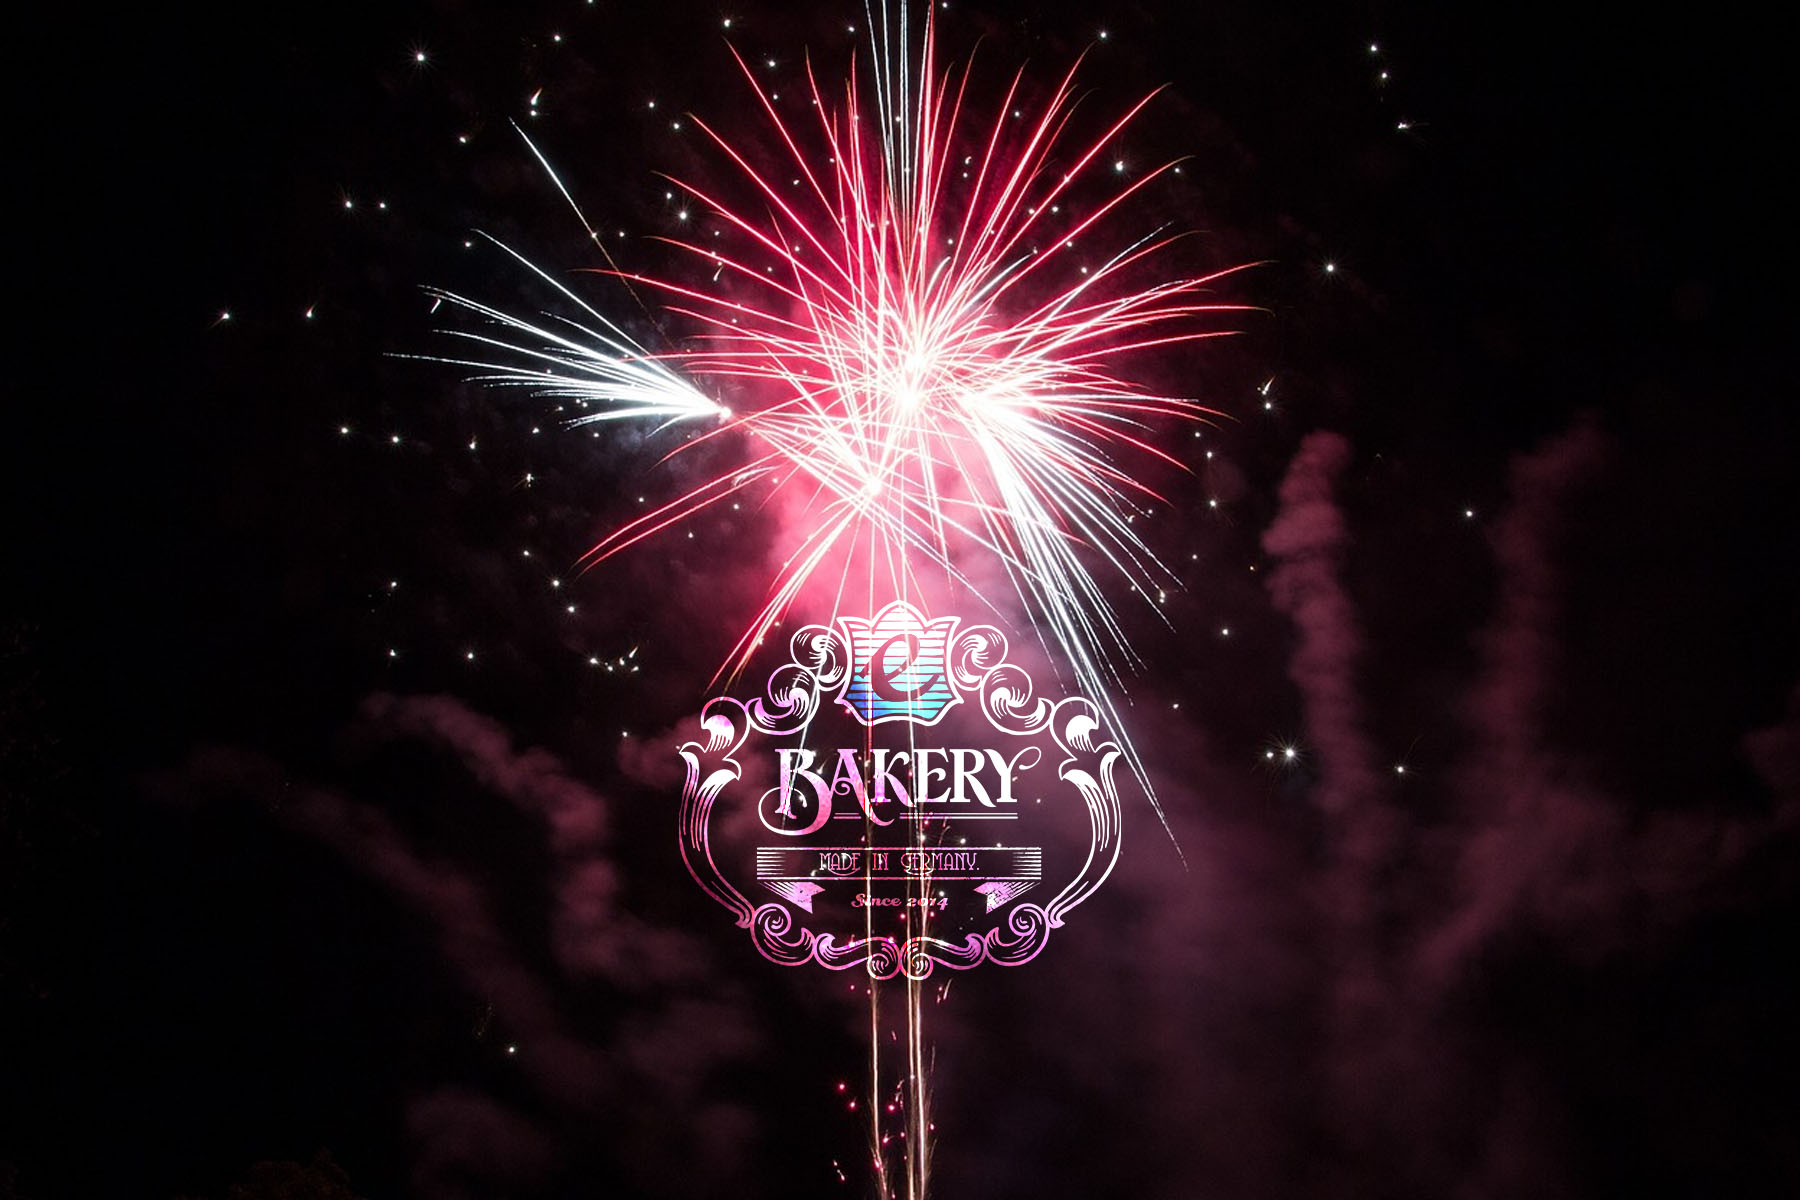 eBakery wishes you a Happy New Year!